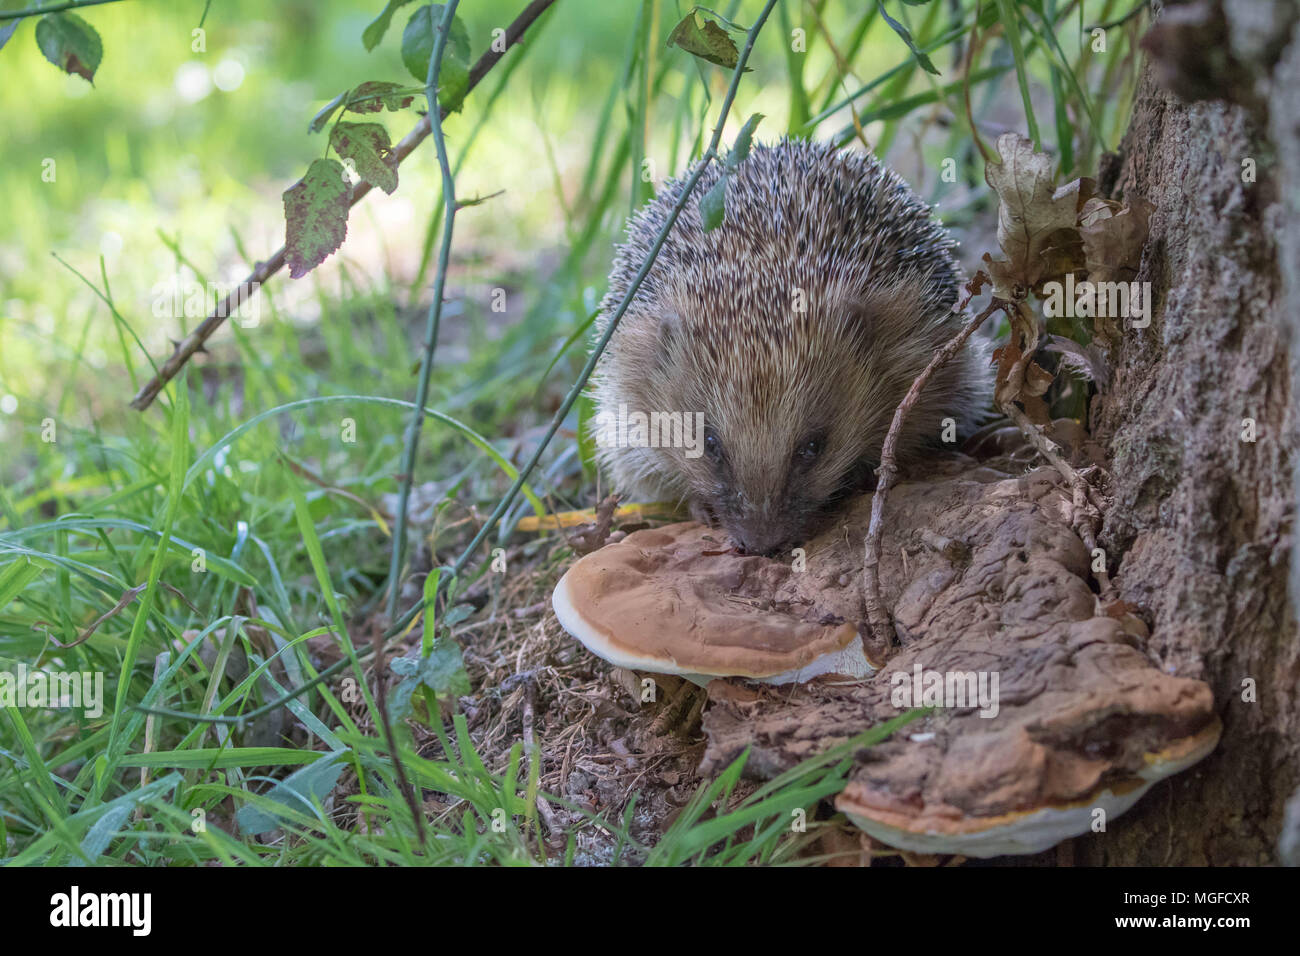 Hedgehog ( Erinaceidae ) licking fungi to use an insecticide Stock Photo